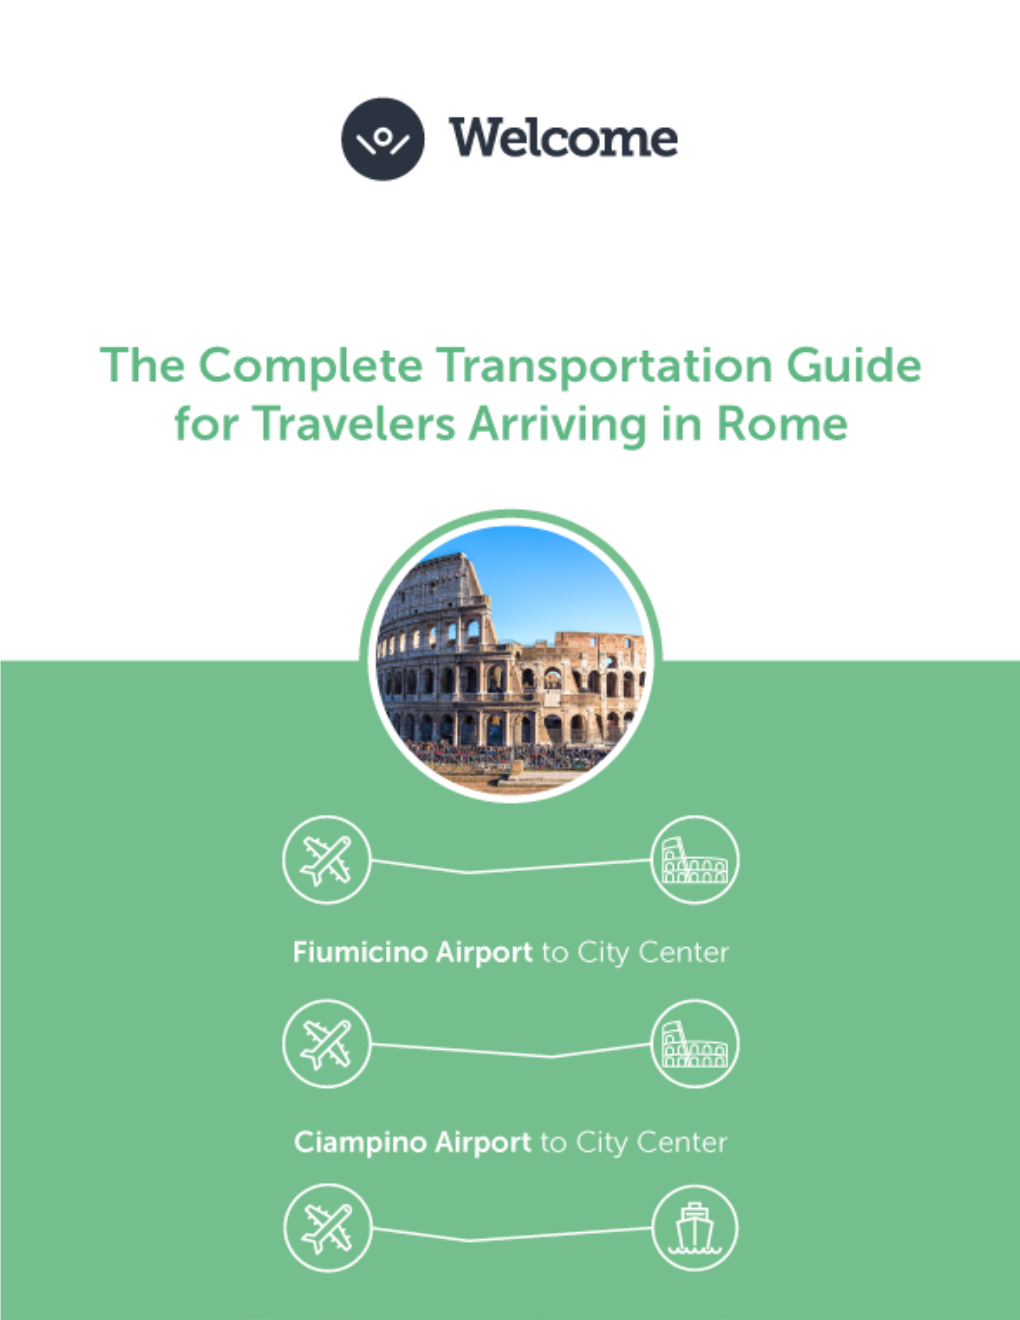 Romeairporttransporationguide-3Routesfinal.Pdf